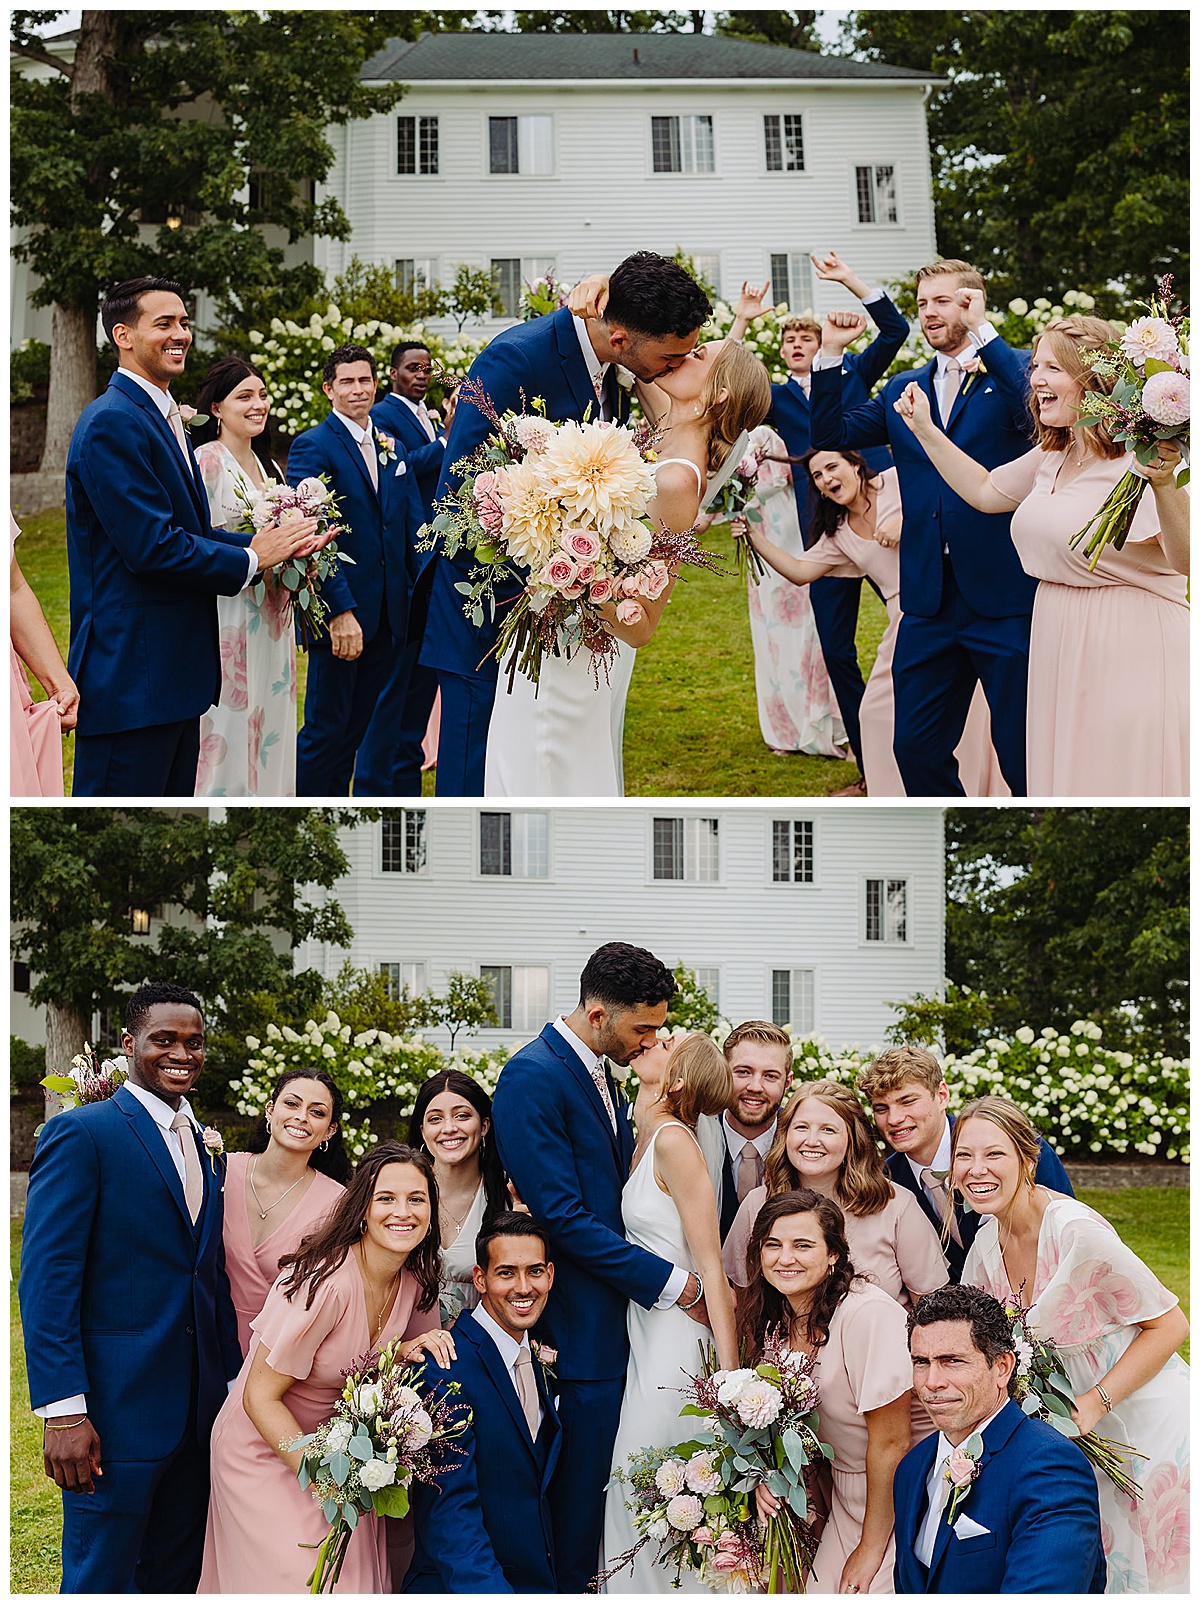 Husband and wife kiss with wedding party celebrating for Kayla Bouren Photography